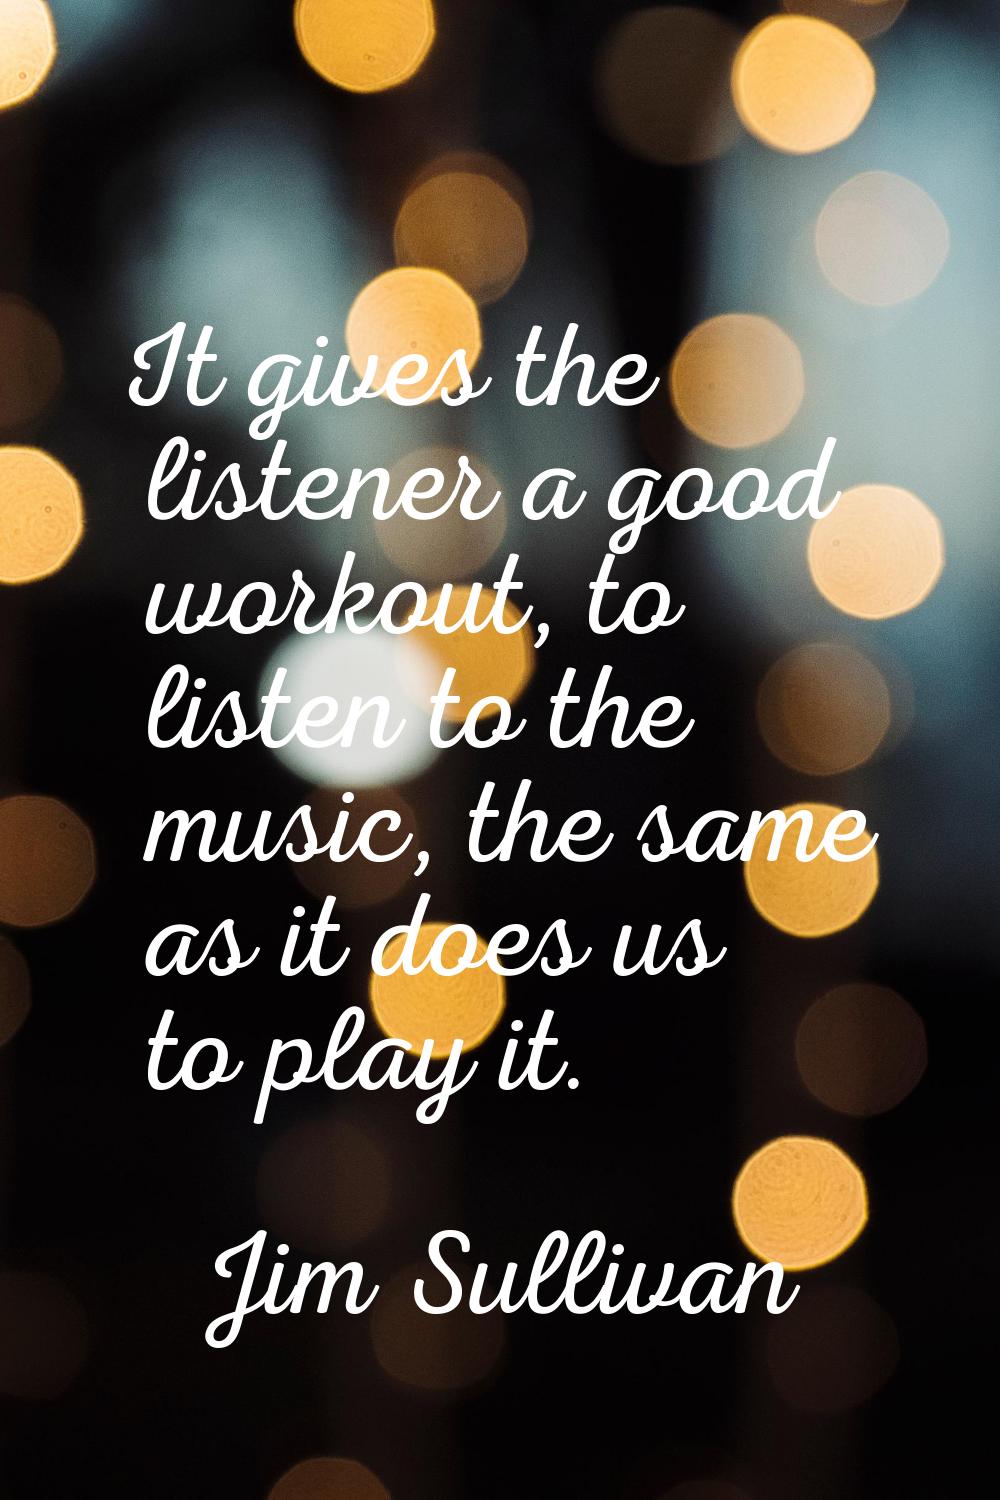 It gives the listener a good workout, to listen to the music, the same as it does us to play it.